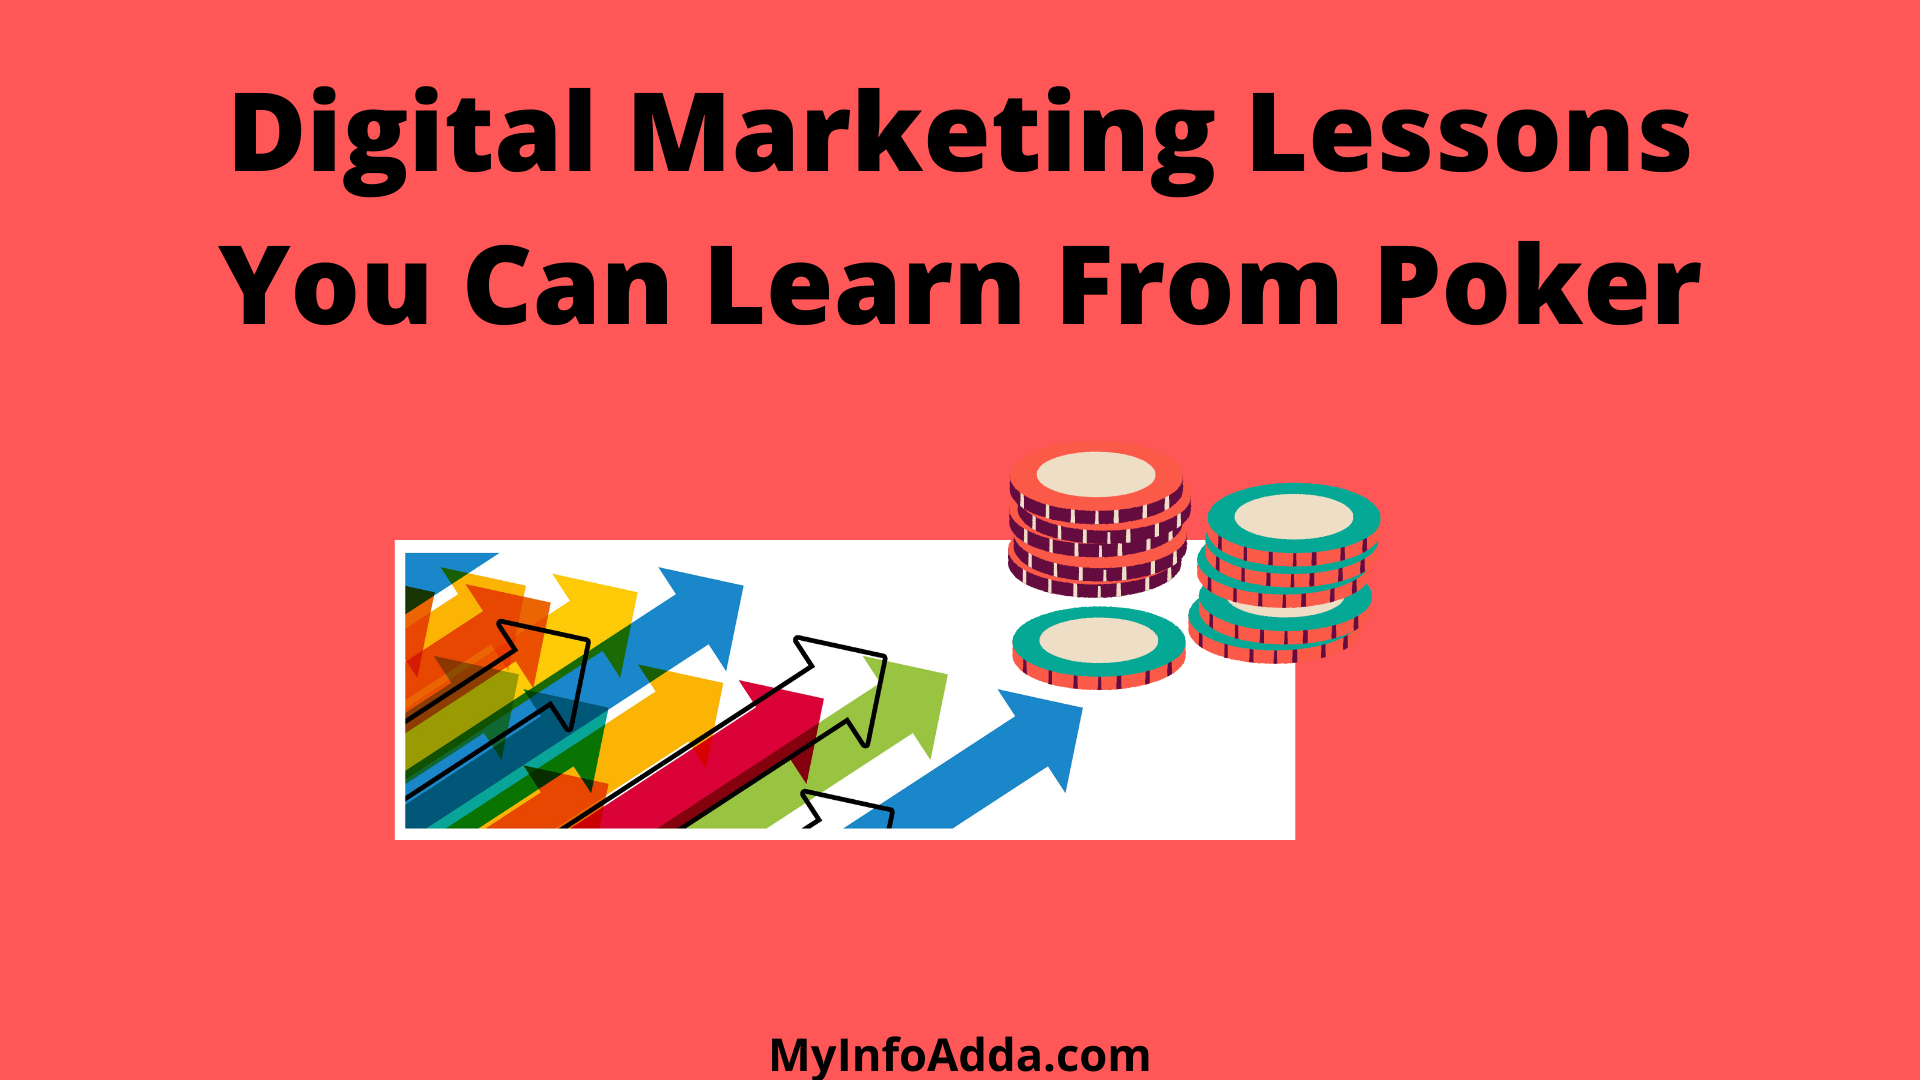 Digital Marketing Lessons You Can Learn From Poker